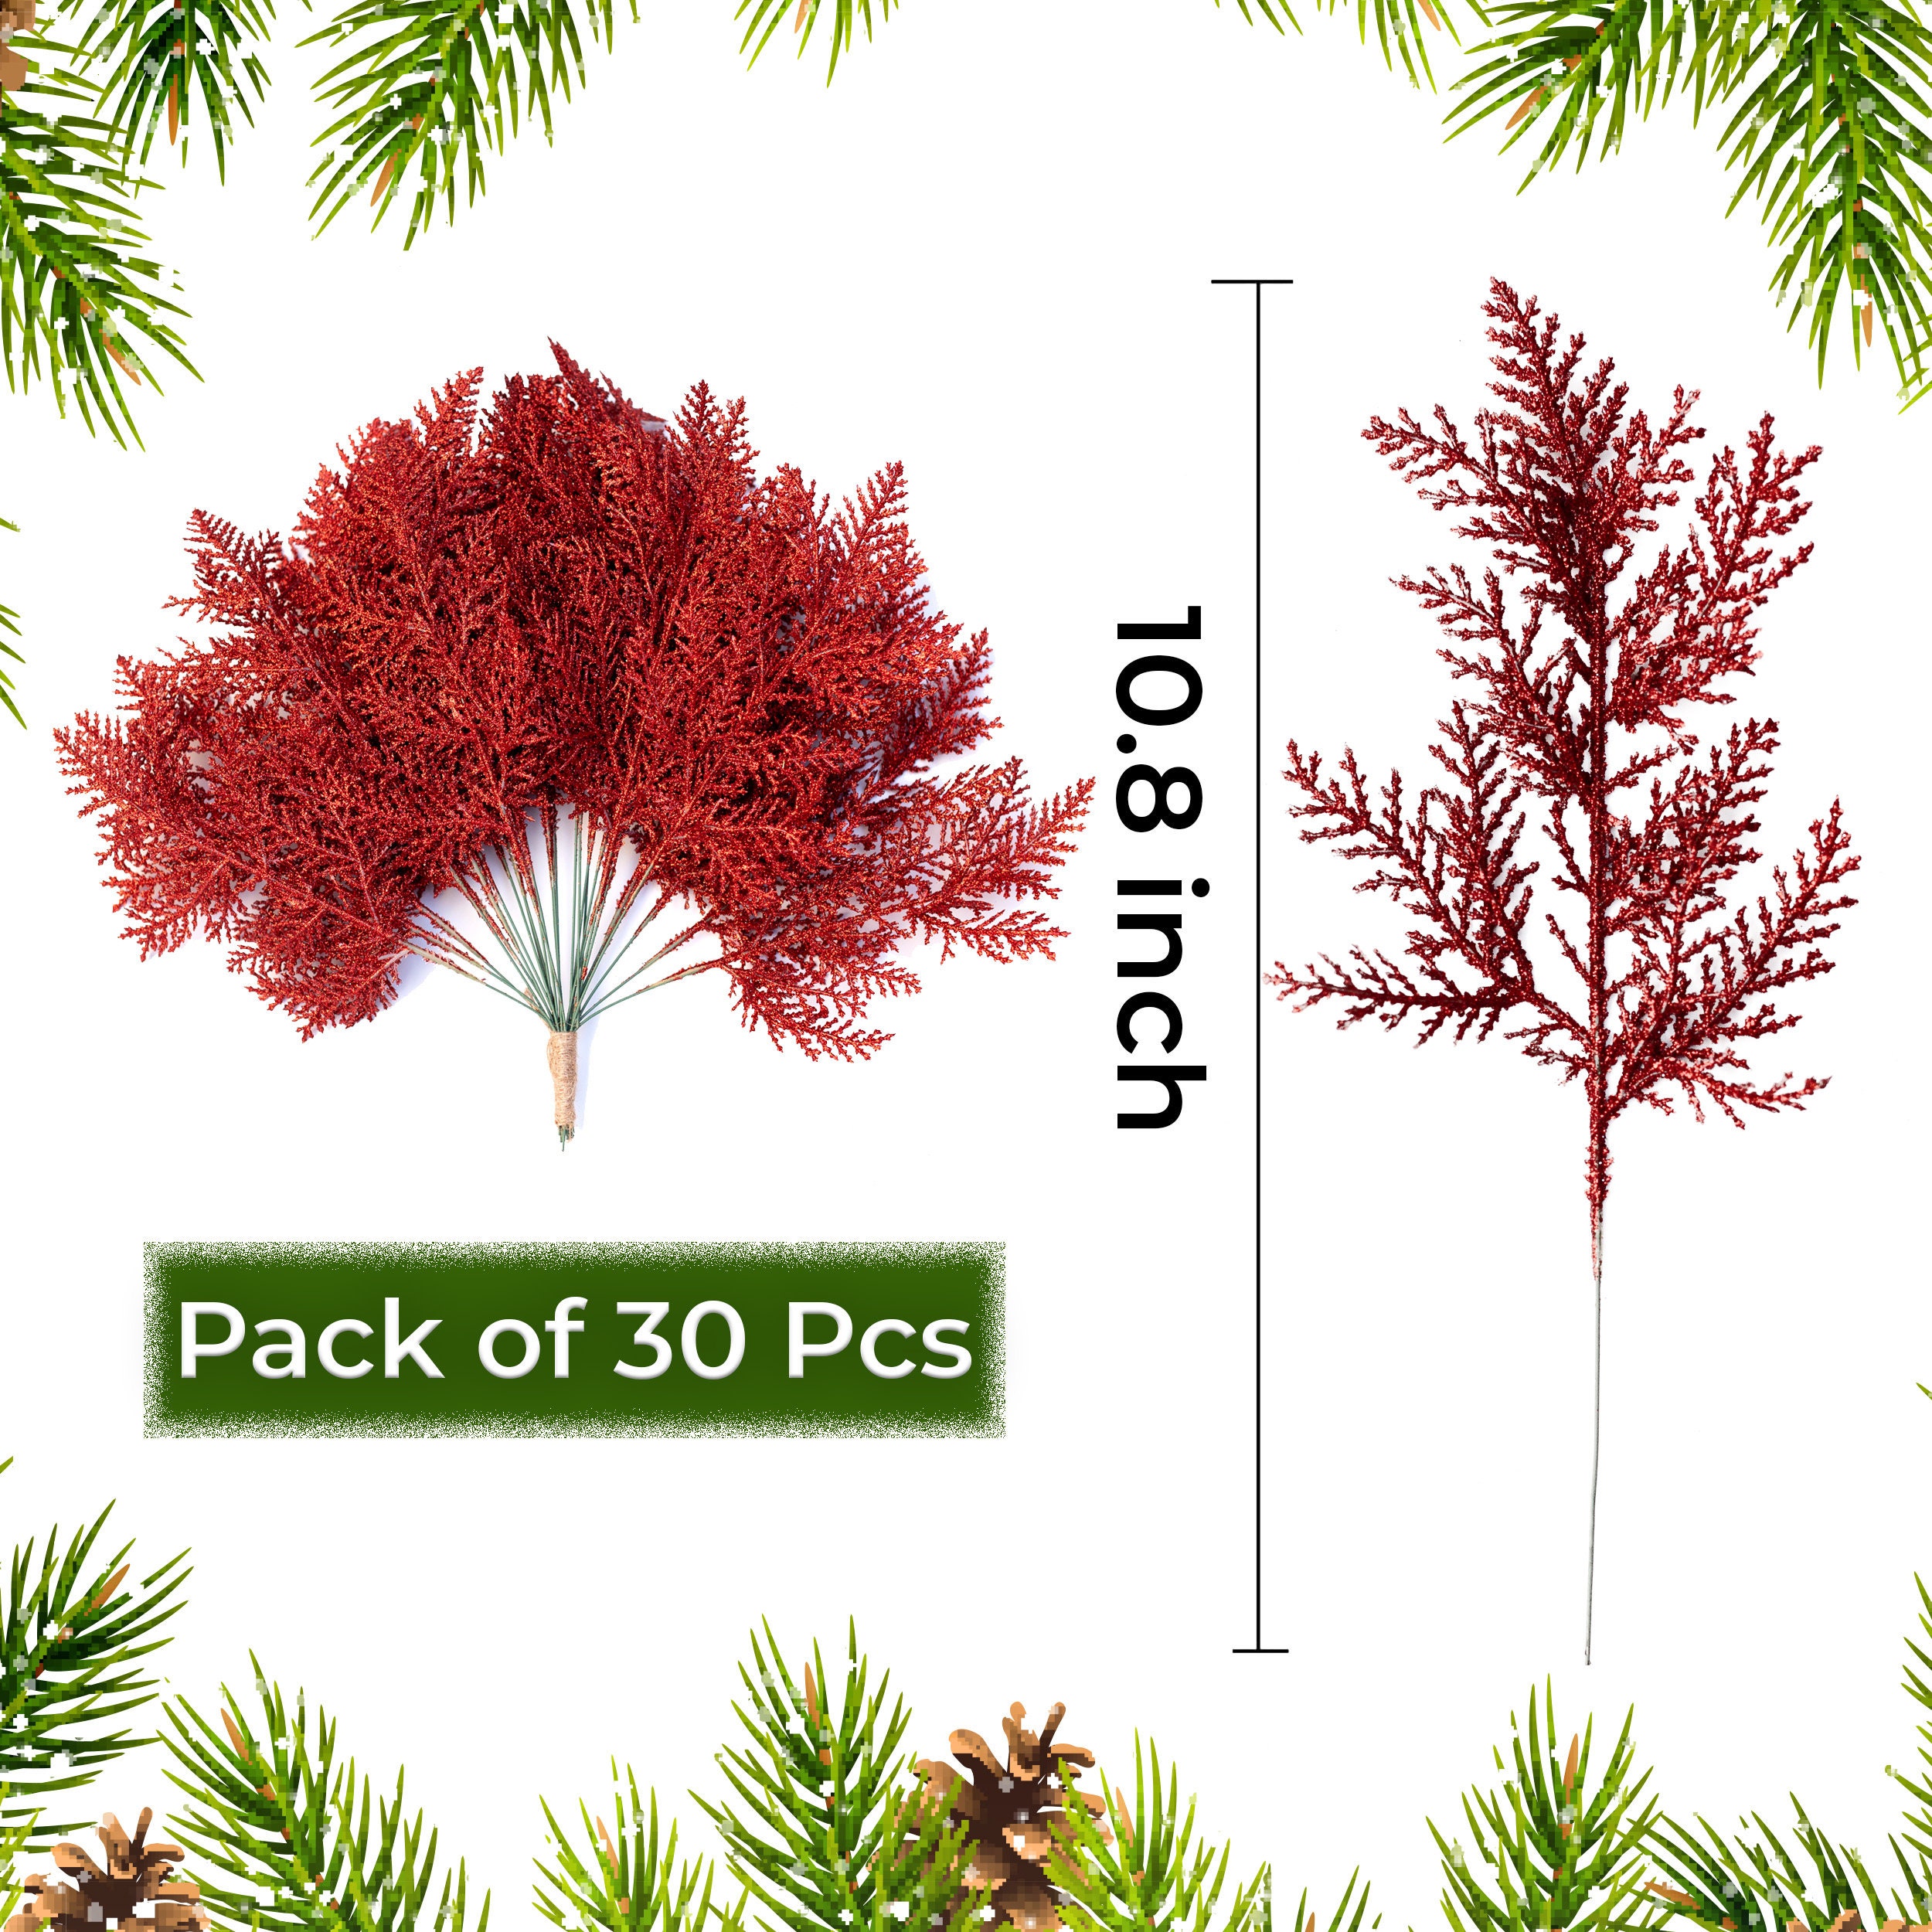 Frcolor 30pcs Artificial Pine Picks Christmas Pine Twig Pine Needles Pine Greenery Stems Xmas Ornaments for DIY Craft Winter Holiday Decorations, Size